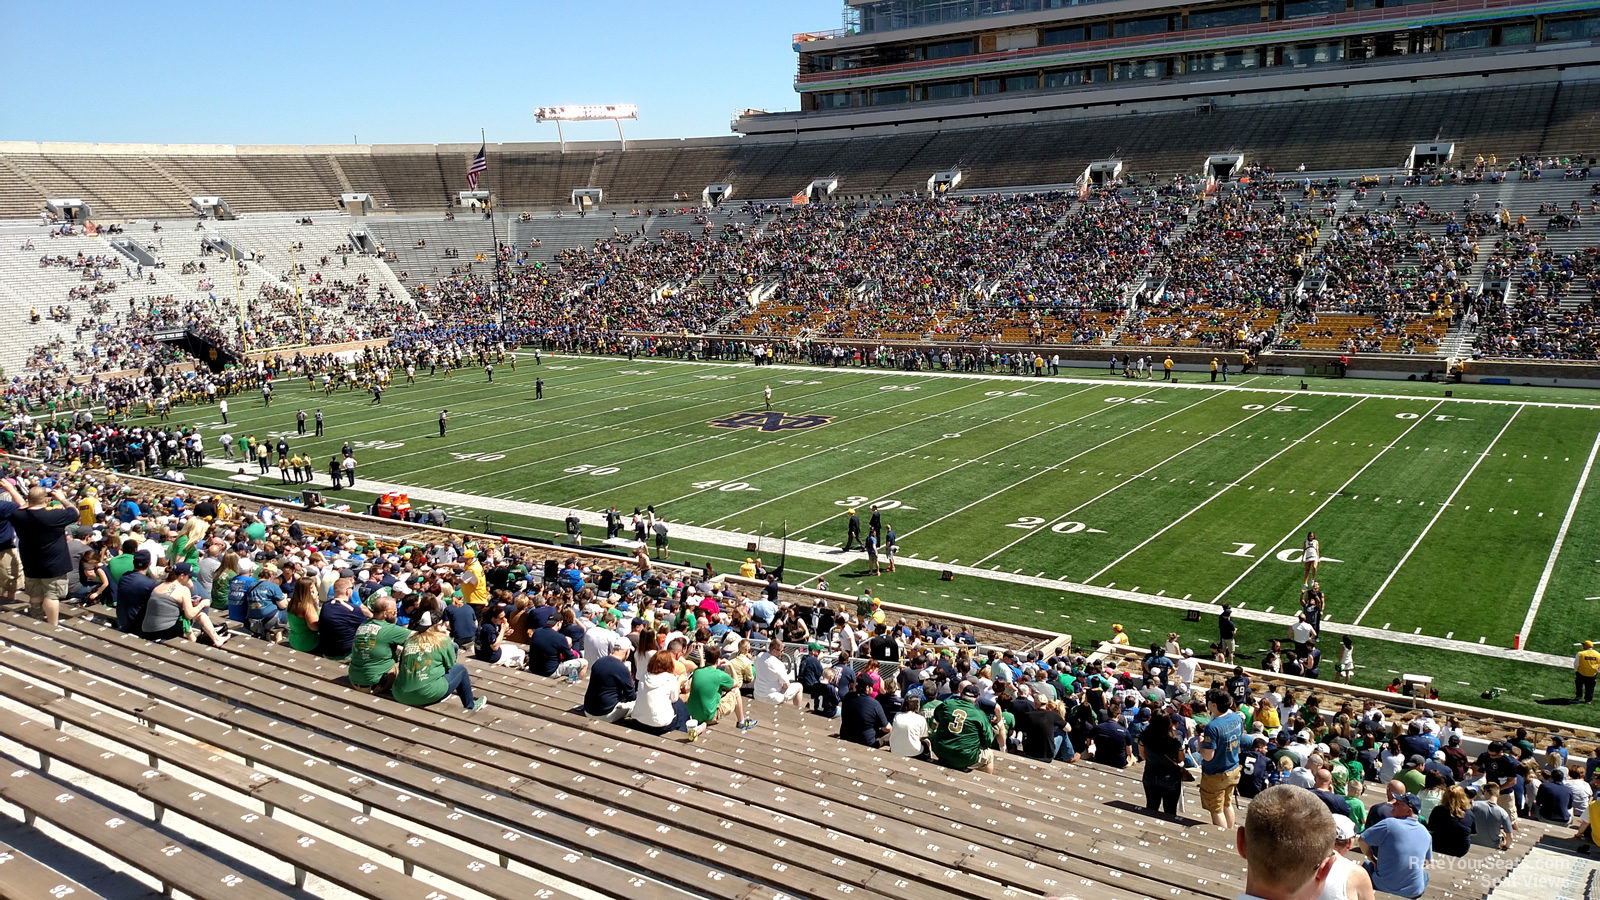 section 24, row 52 seat view  - notre dame stadium